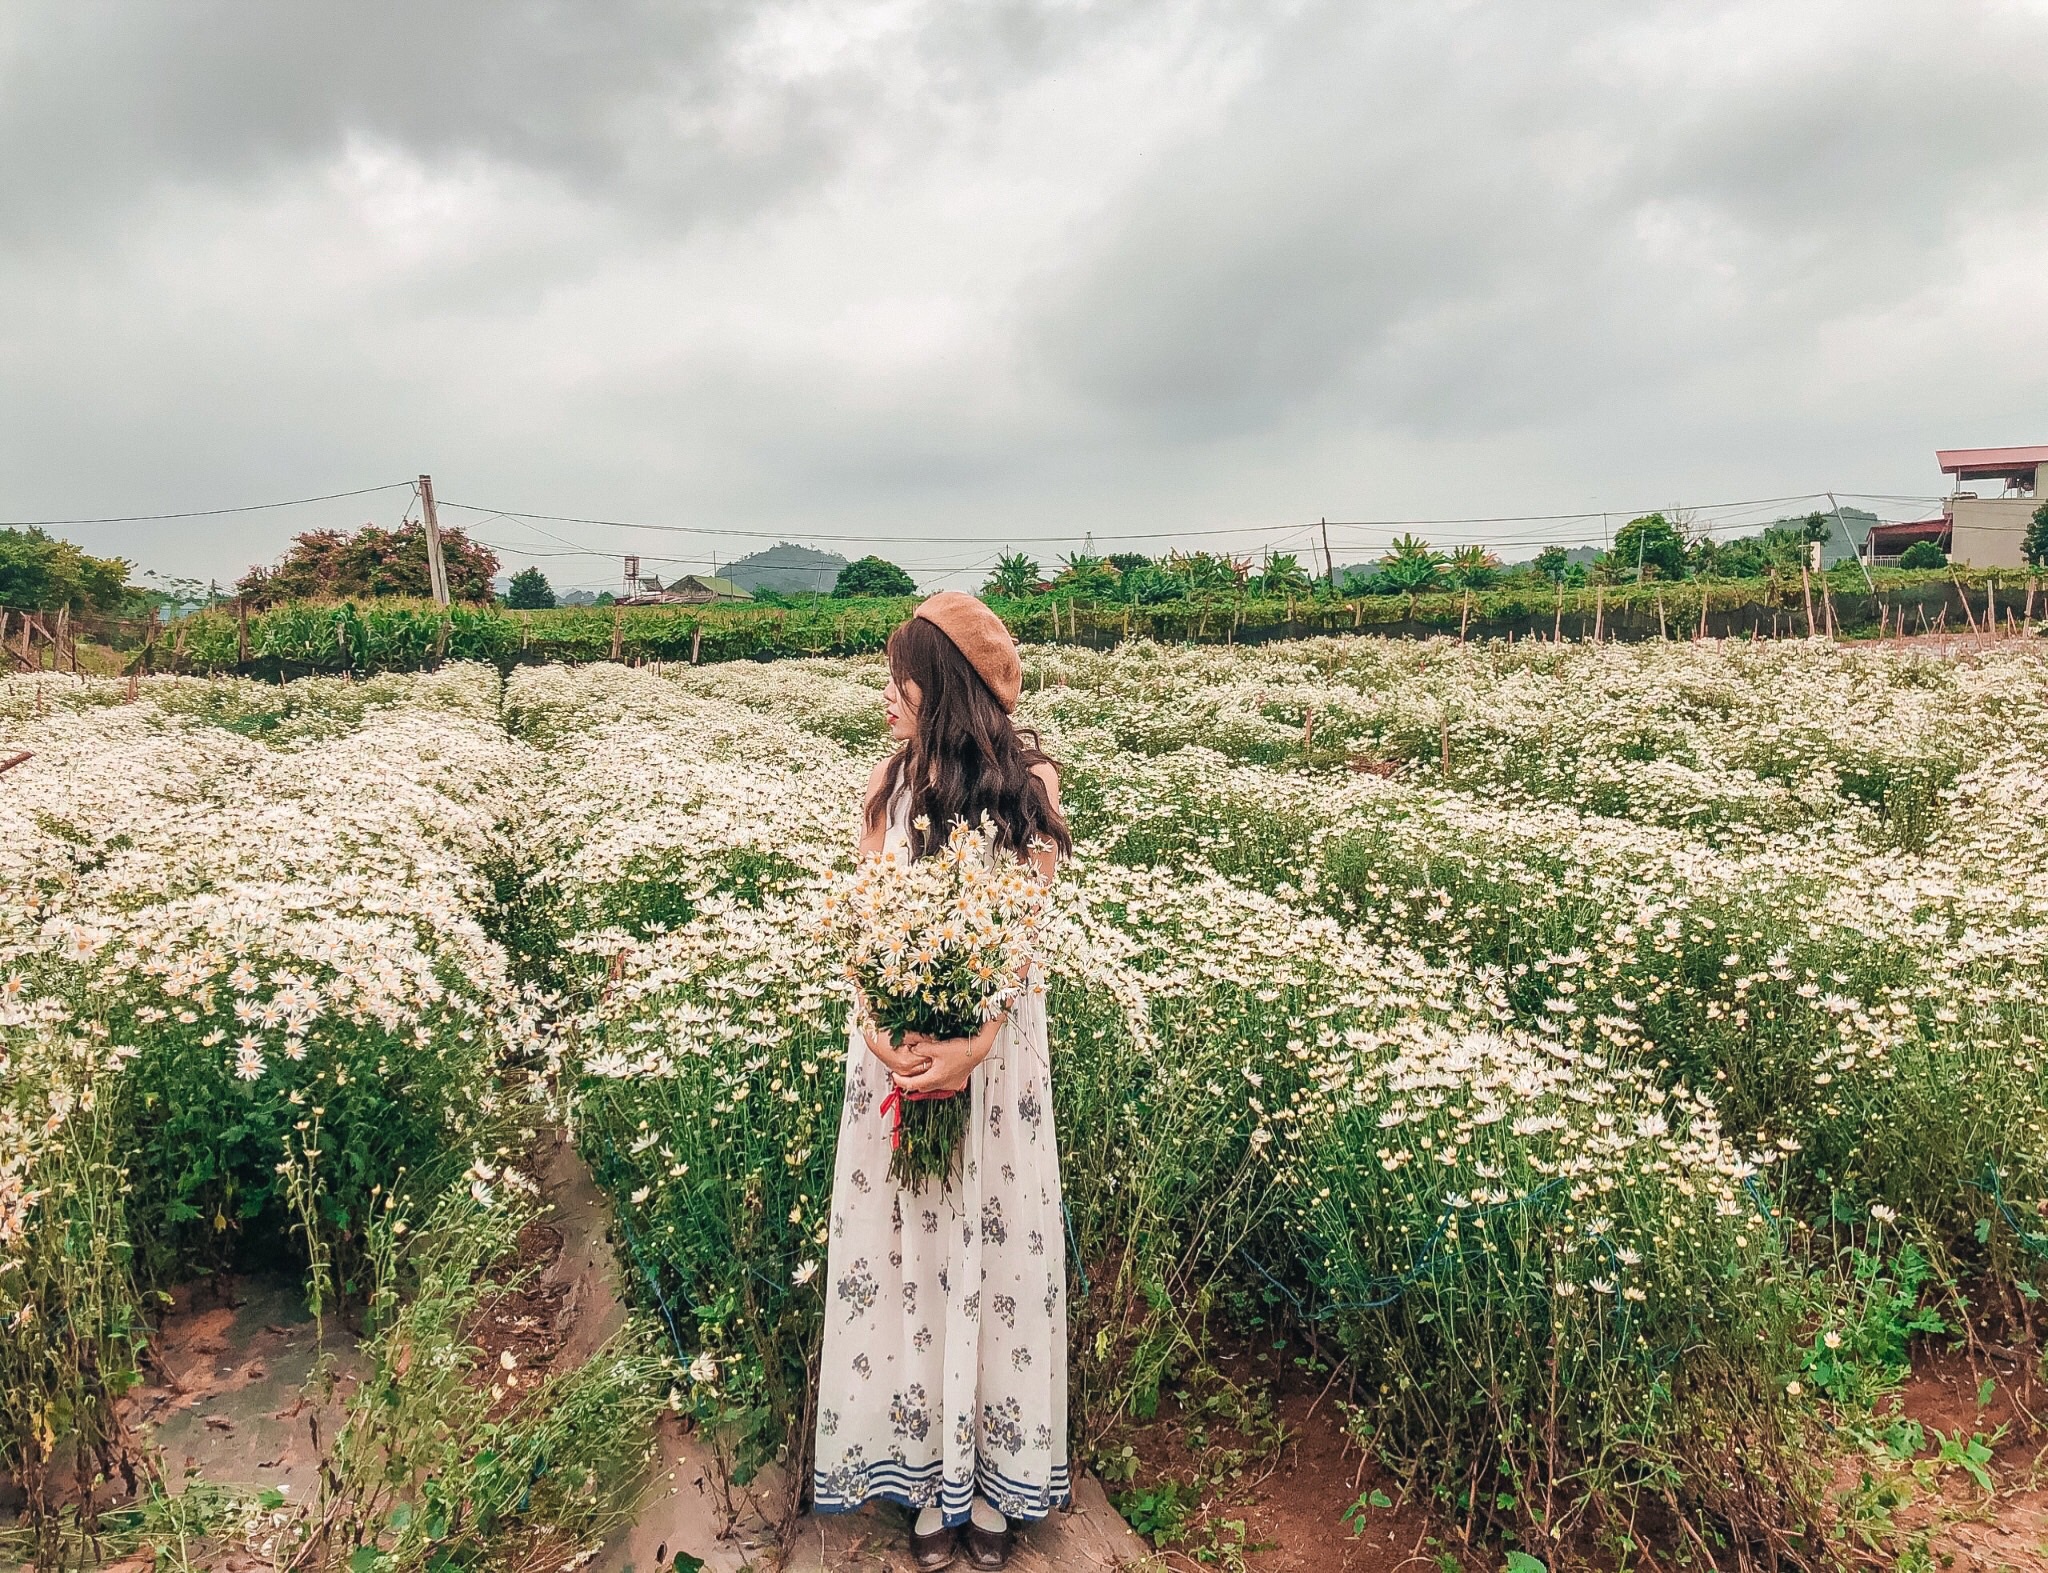 Dazedly admiring the chrysanthemum field in the middle of Moc Chau plateau - 17